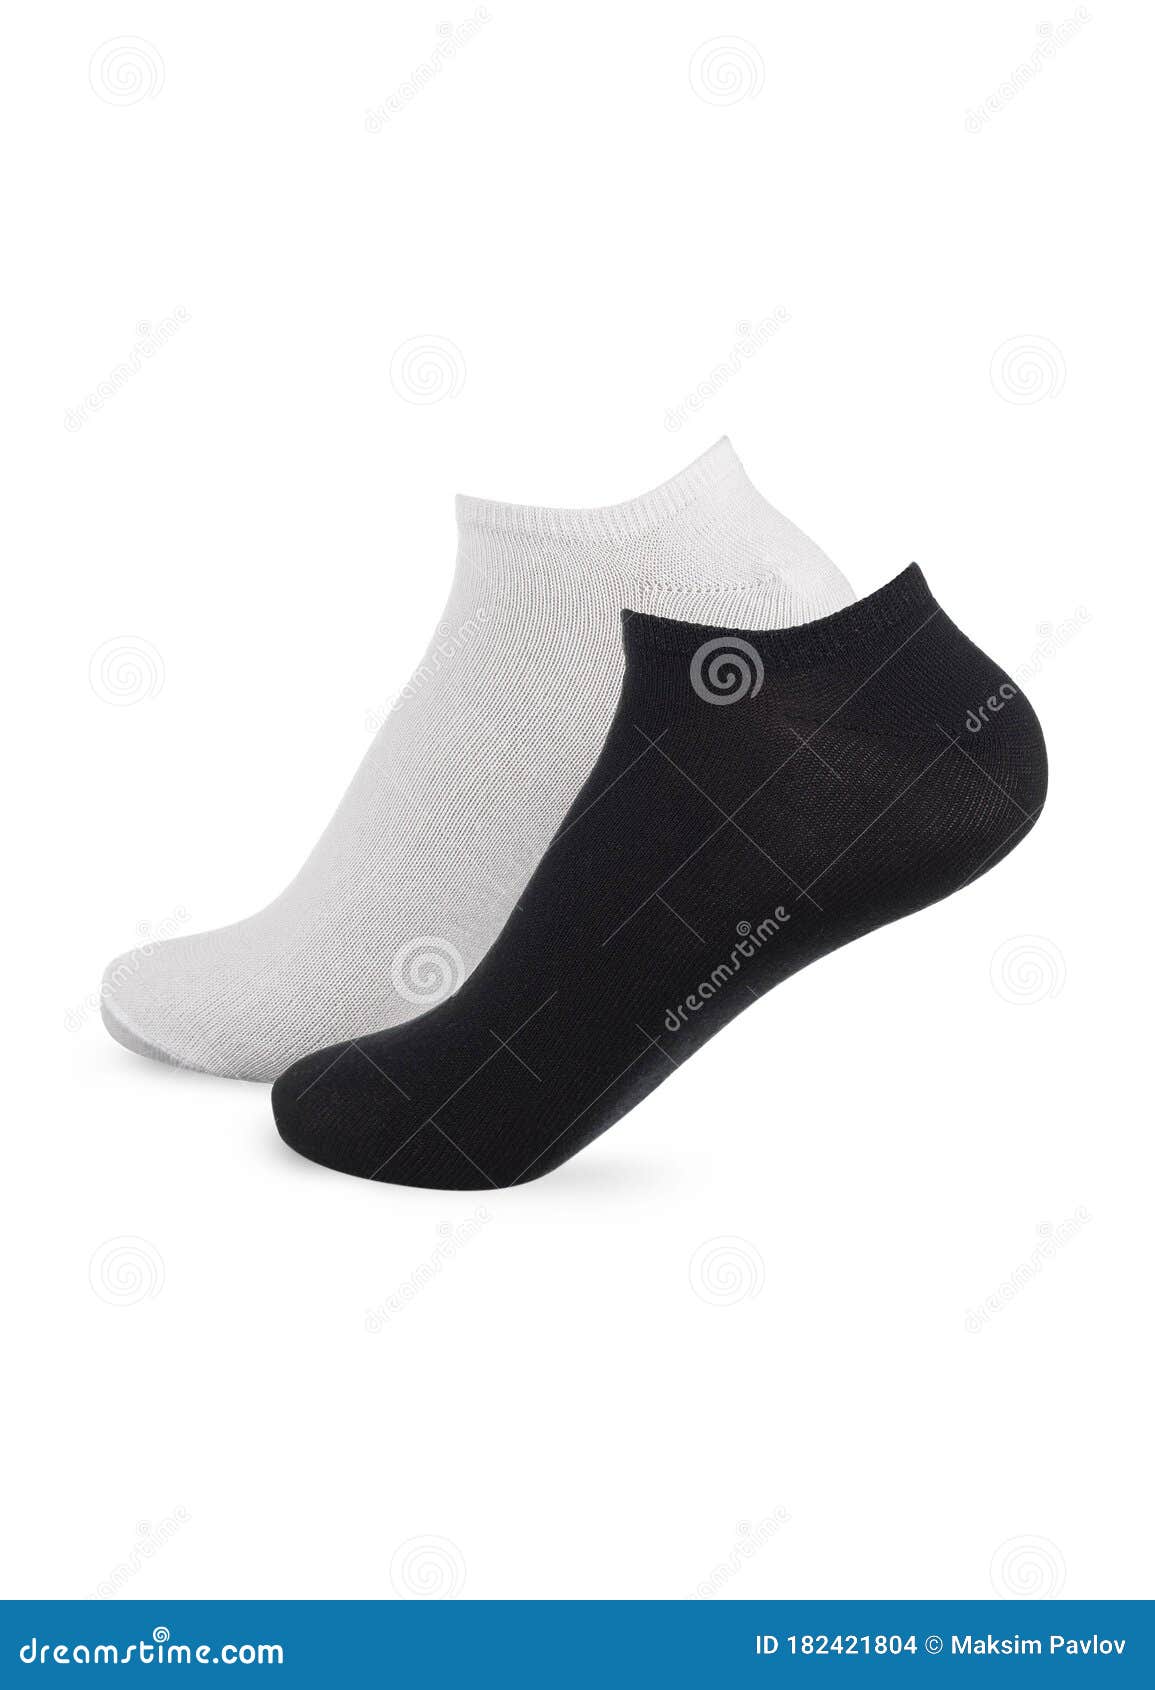 Set of Socks White and Black Color Isolated on White Background. One ...